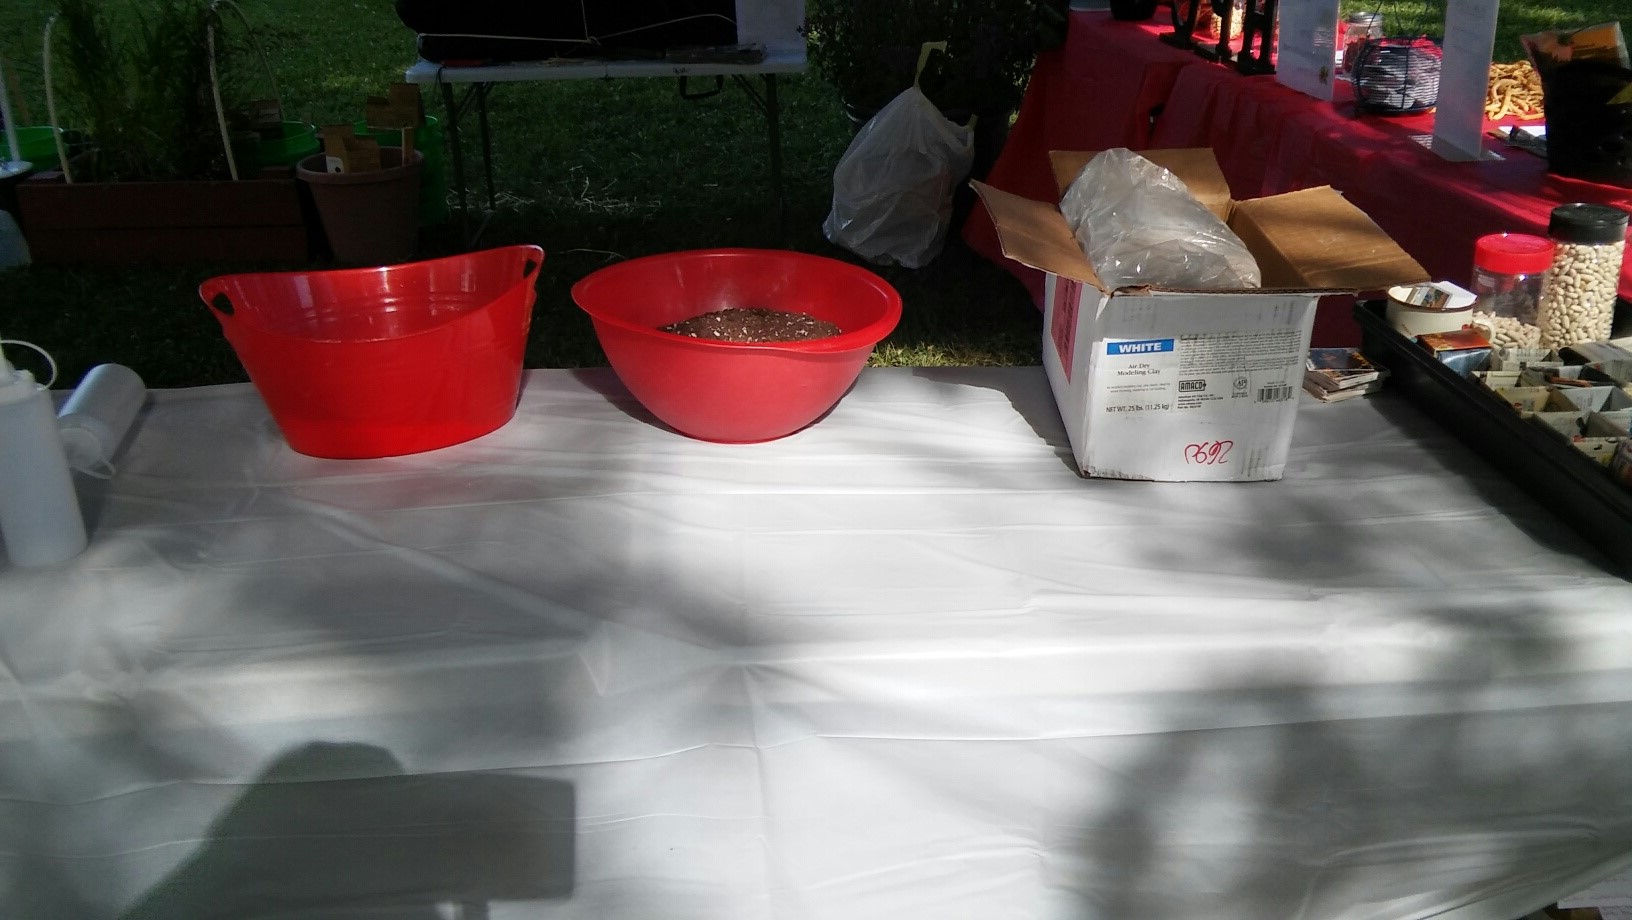 Setting up the seed tape and seed ball demonstration table at The Westgate Summer Jam 2016 - #2.jpg